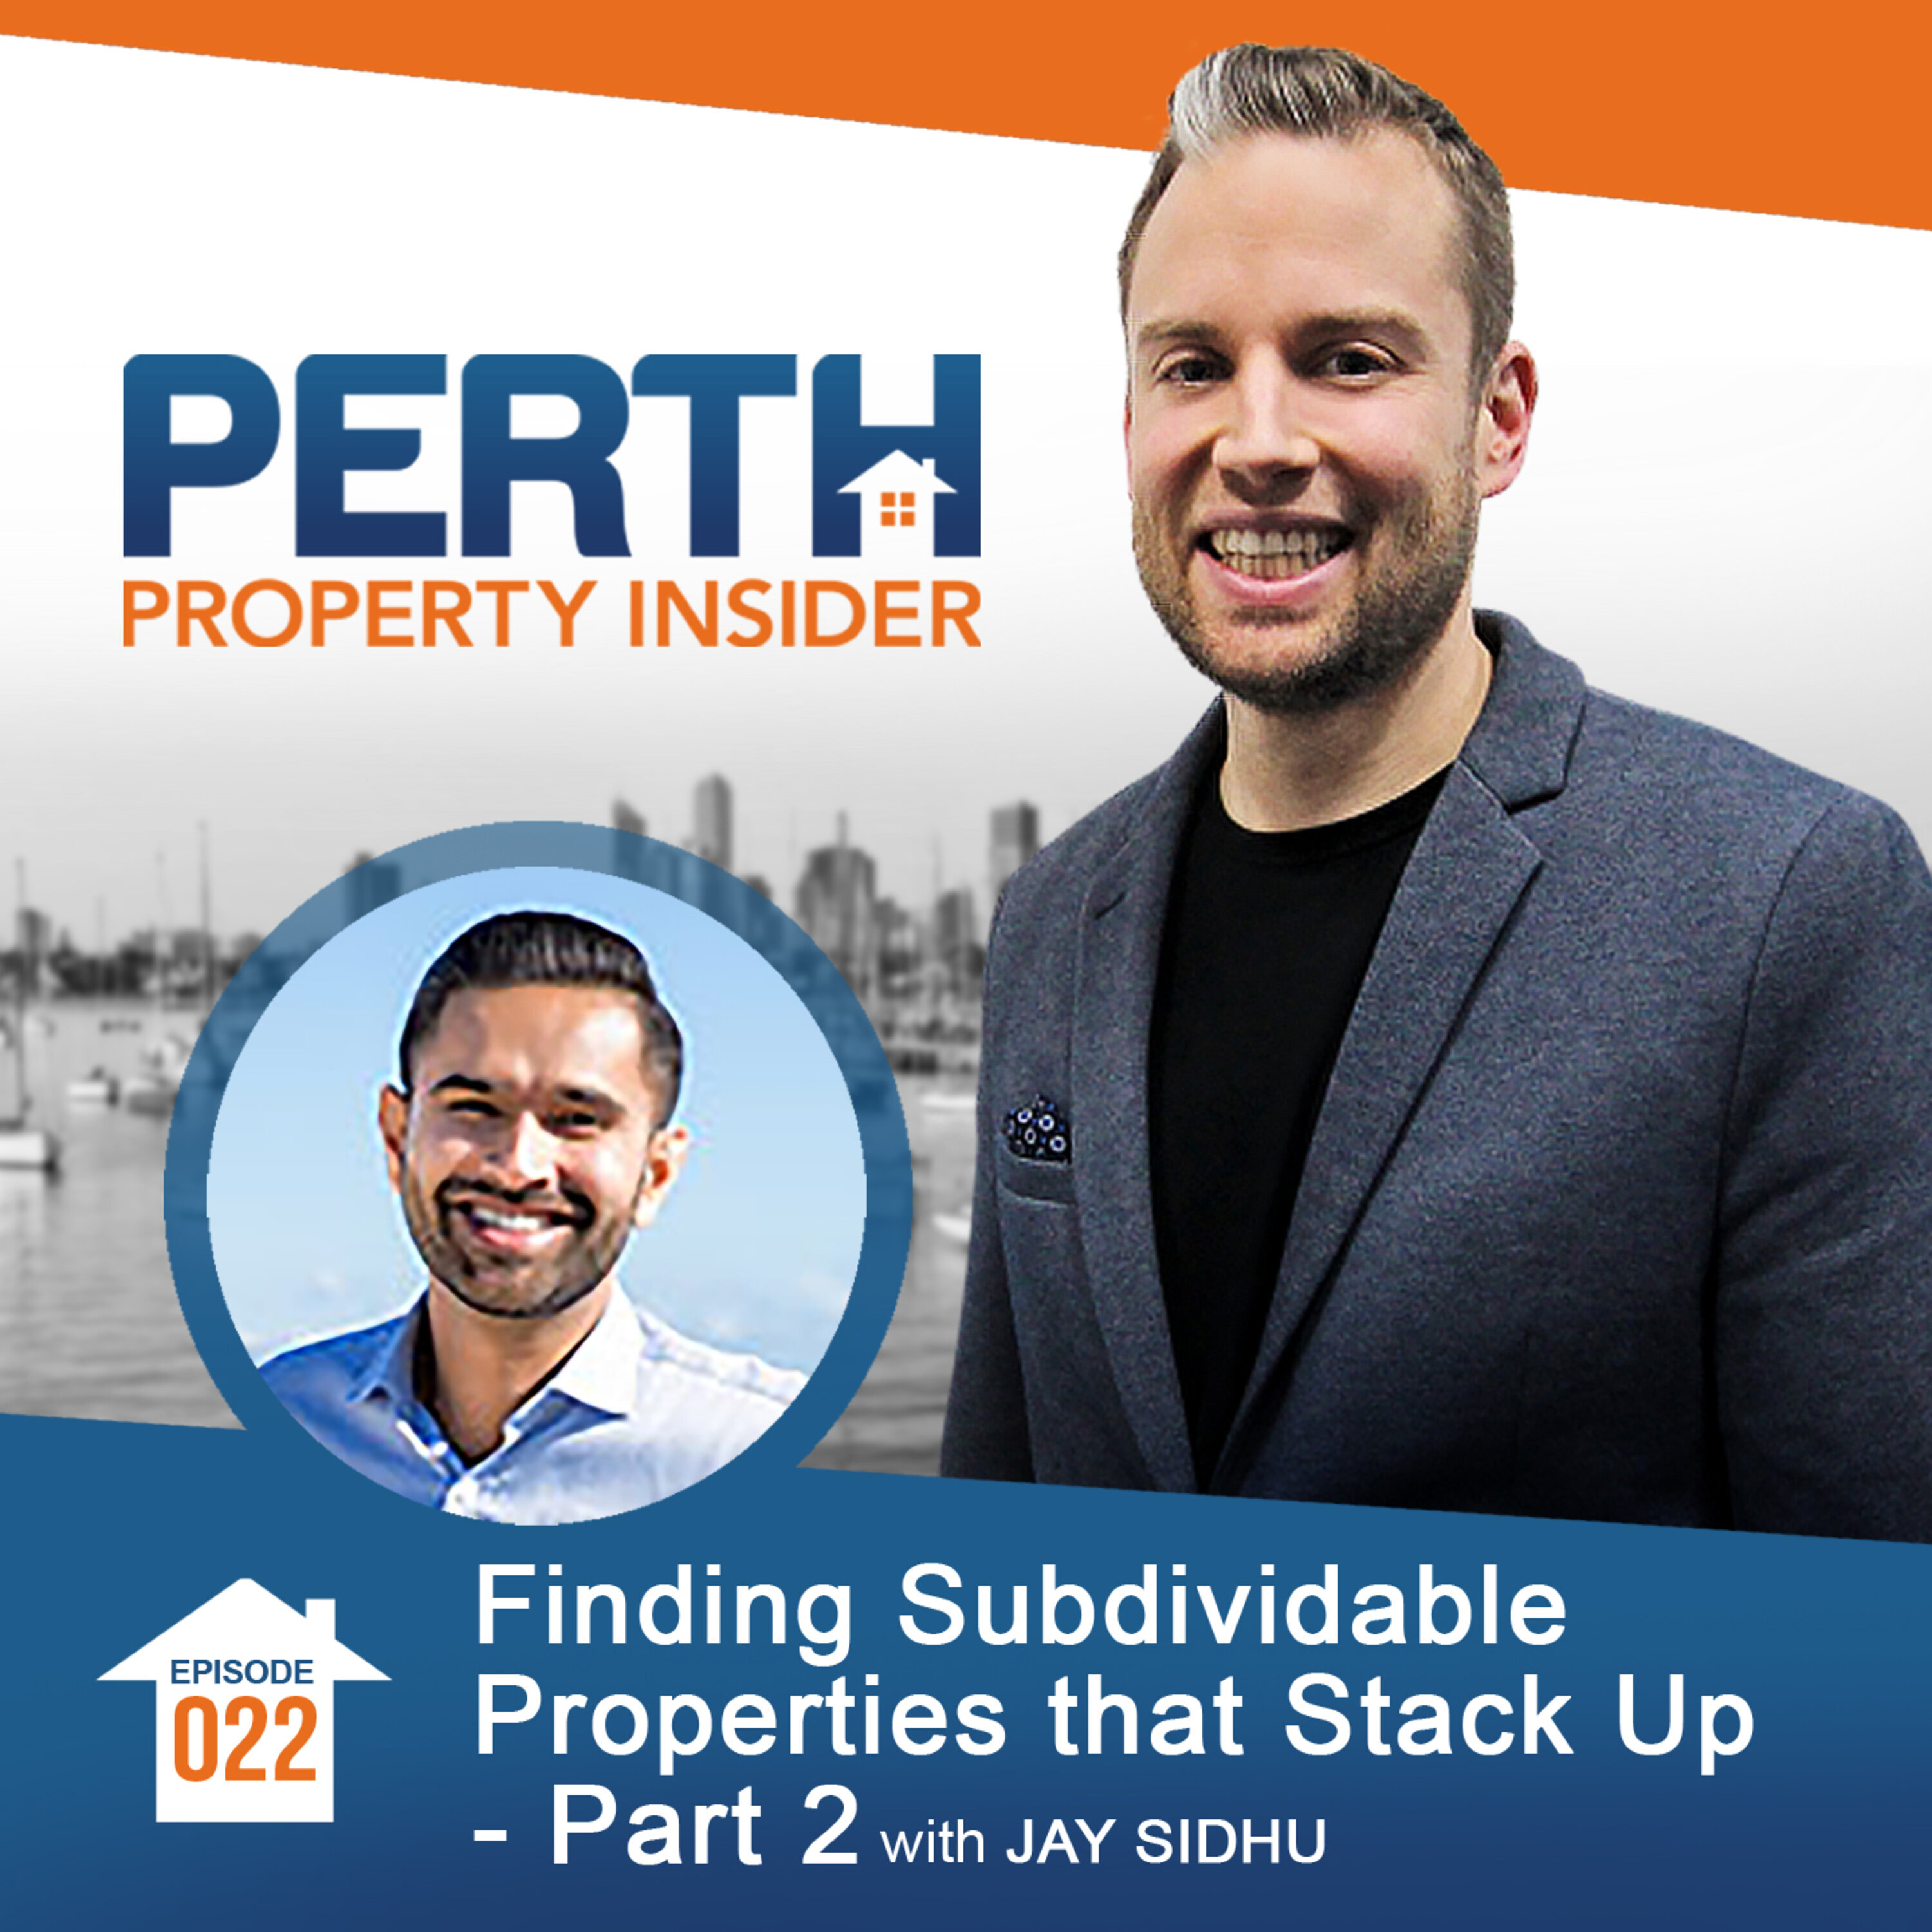 Finding Subdividable Properties that Stack Up - Part 2 with Jay Sidhu